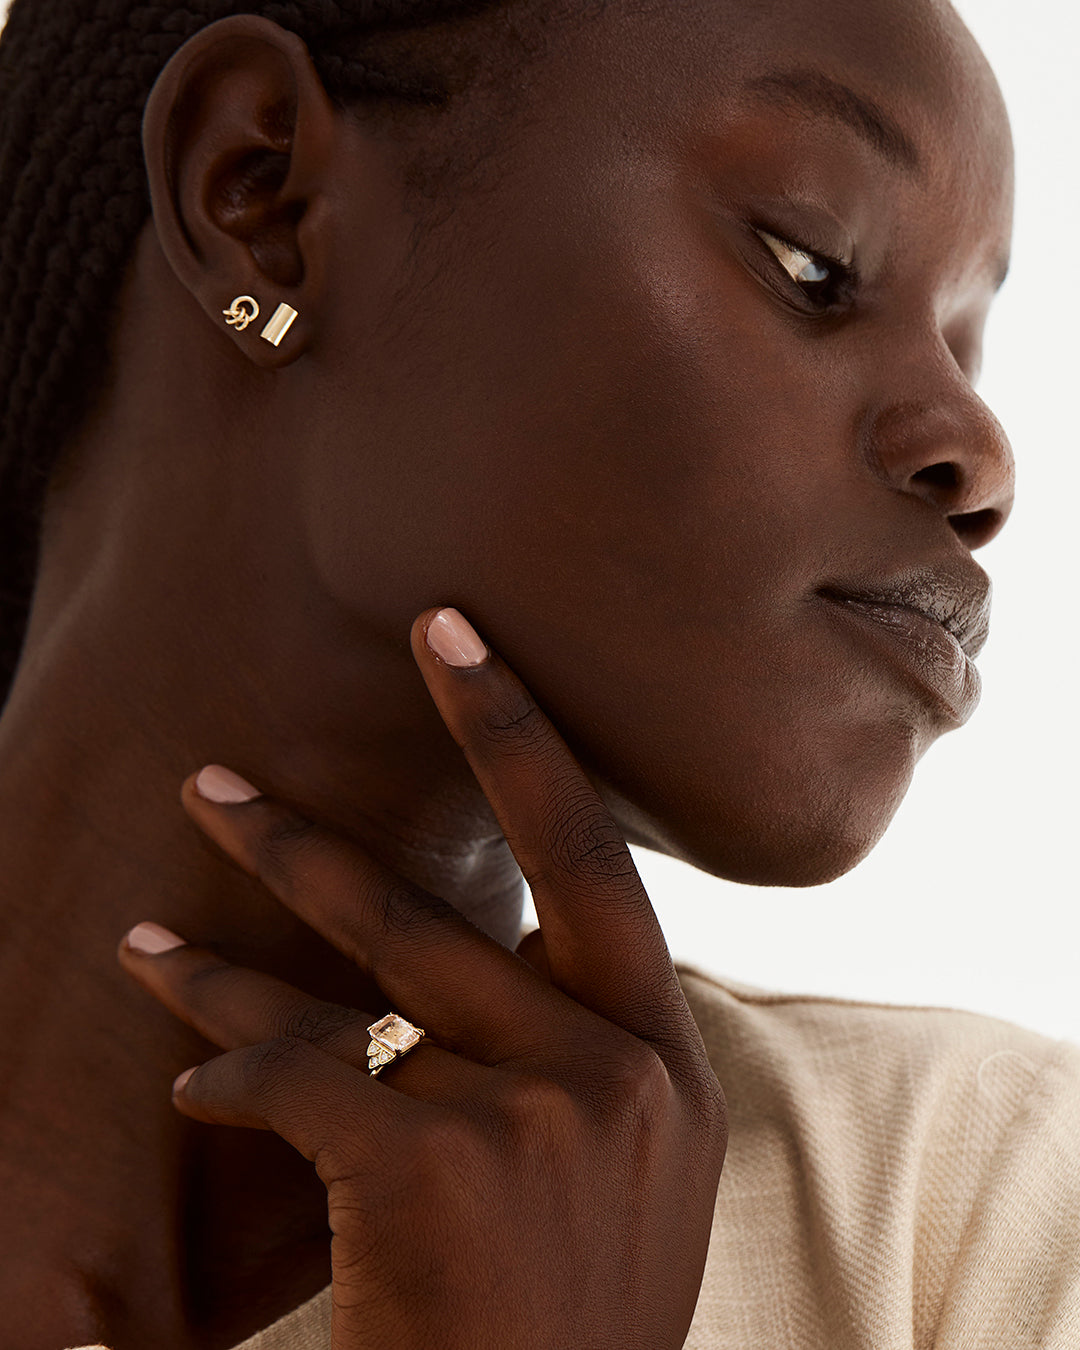 A model wears our Dari studs, featuring interwoven rings in yellow gold